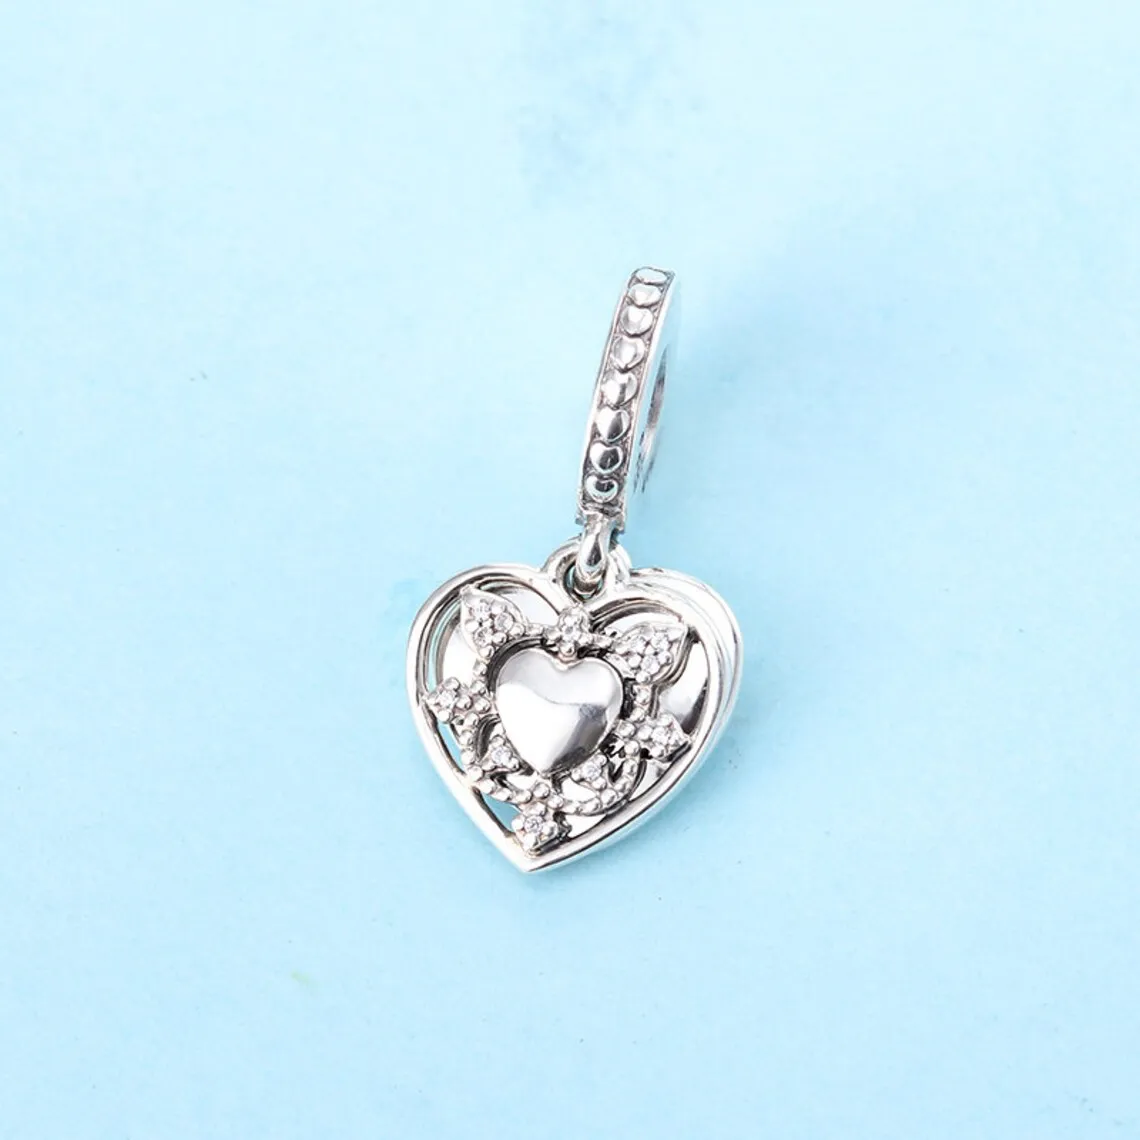 

925 Sterling Silver My Wife Always Heart Dangle with Clear Cz Charm Bead Fits All European Pandora Bracelets Necklaces